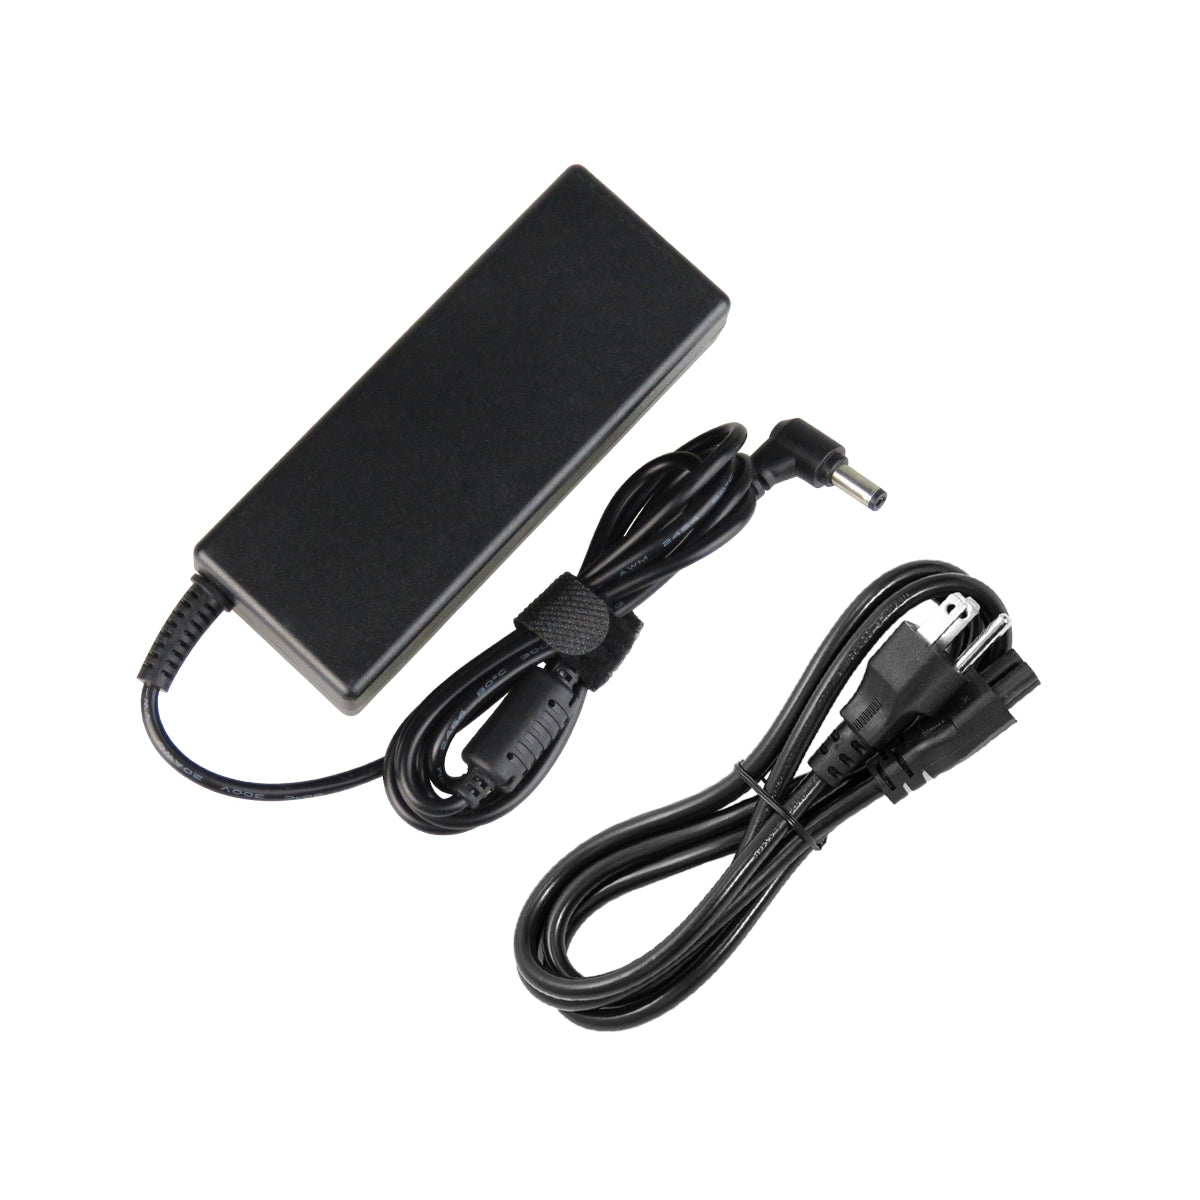 AC Adapter Charger for ASUS X54H Notebook.